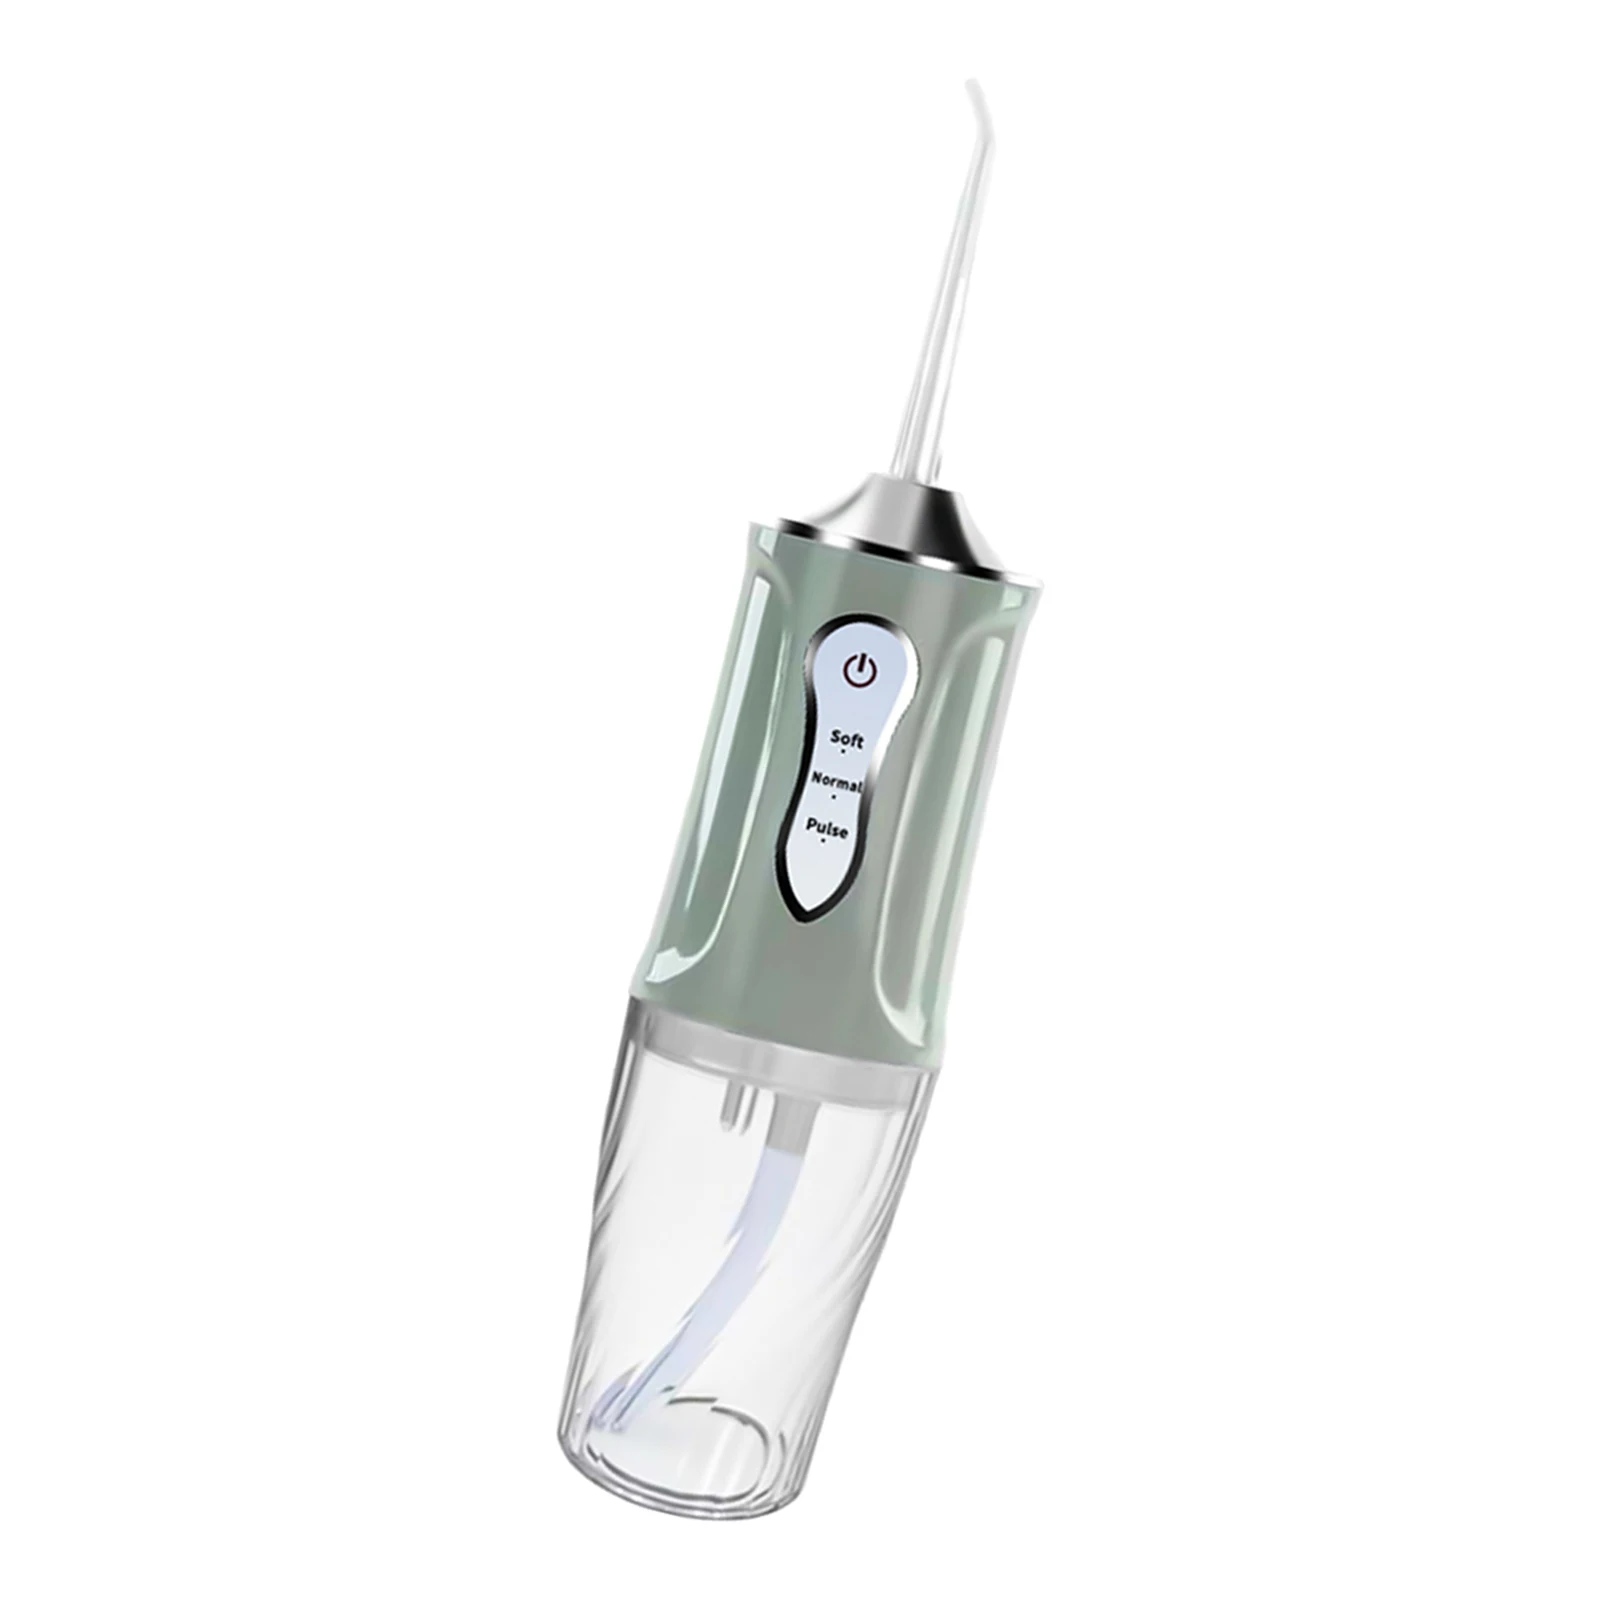 Oral Irrigator USB 3 Modes Cleanable Battery Operated Jet Cordless Advanced Portable Powerful Cleaner Nozzles for Braces